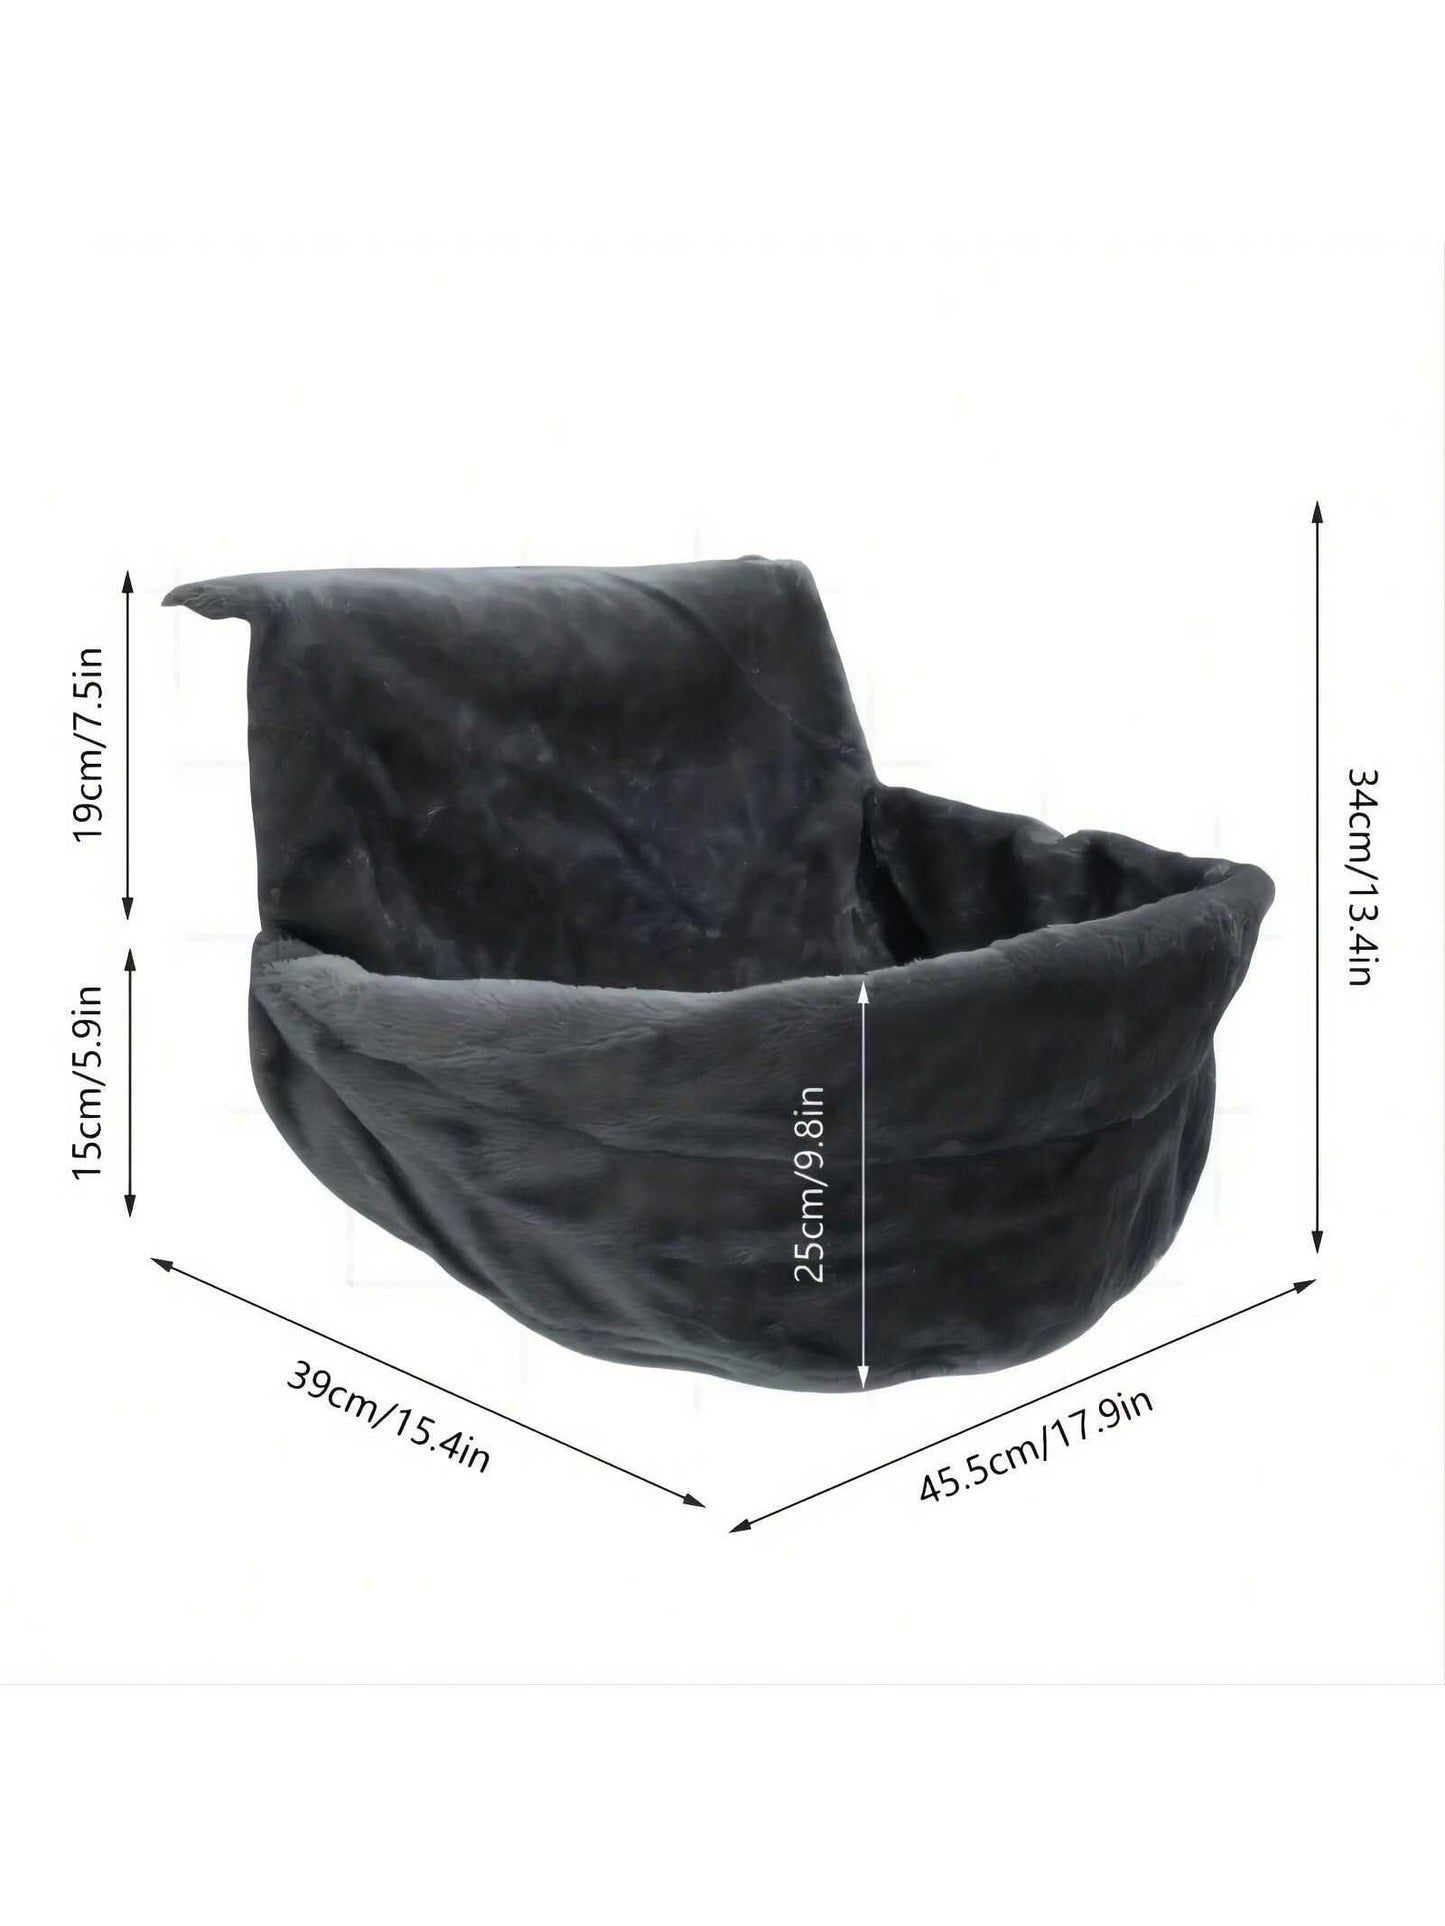 1pc Deep Grey Detachable & Washable Radiator D-shaped Pet Bed For Small And Medium-sized Pets Weighing Within 15kg